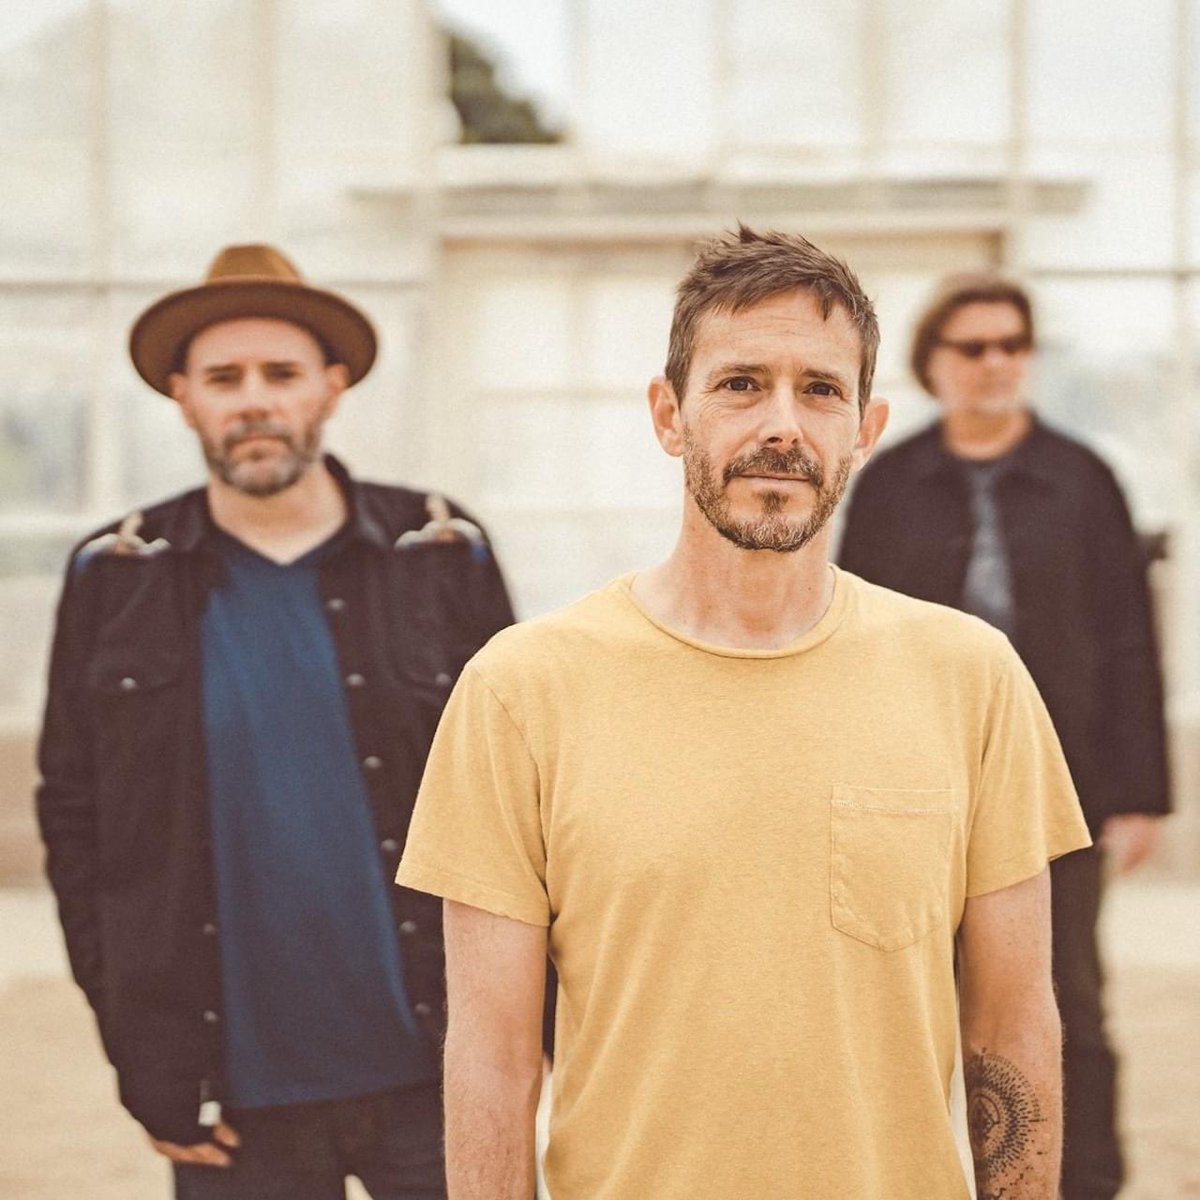 ****NEW SHOWS ANNOUNCEMENT*** August 8th - Tarrytown Music Hall in Tarrytown, NY August 29th - Lobero Theatre in Santa Barbara, CA ￼ 🎟️ toadthewetsprocket.com/on-tour/